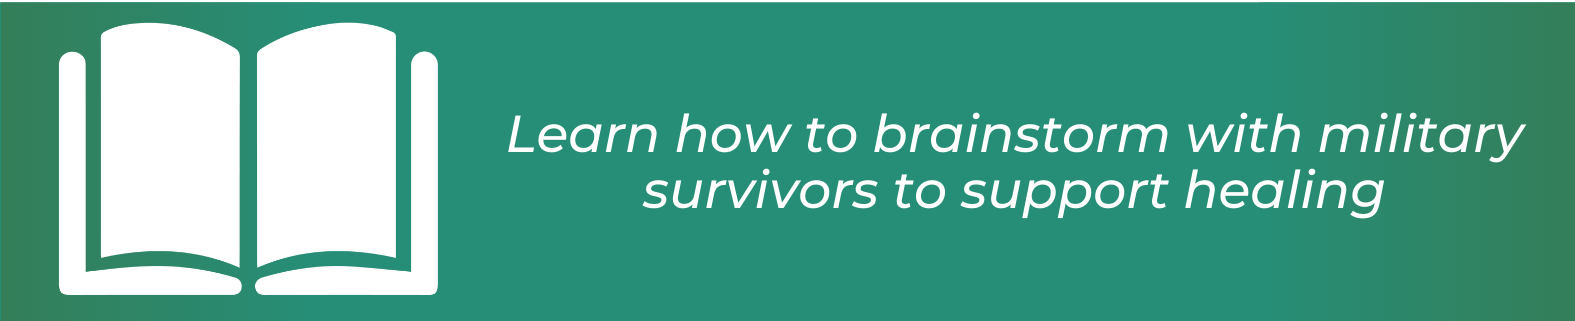 Learn how to Brainstorm with military survivors to support healing